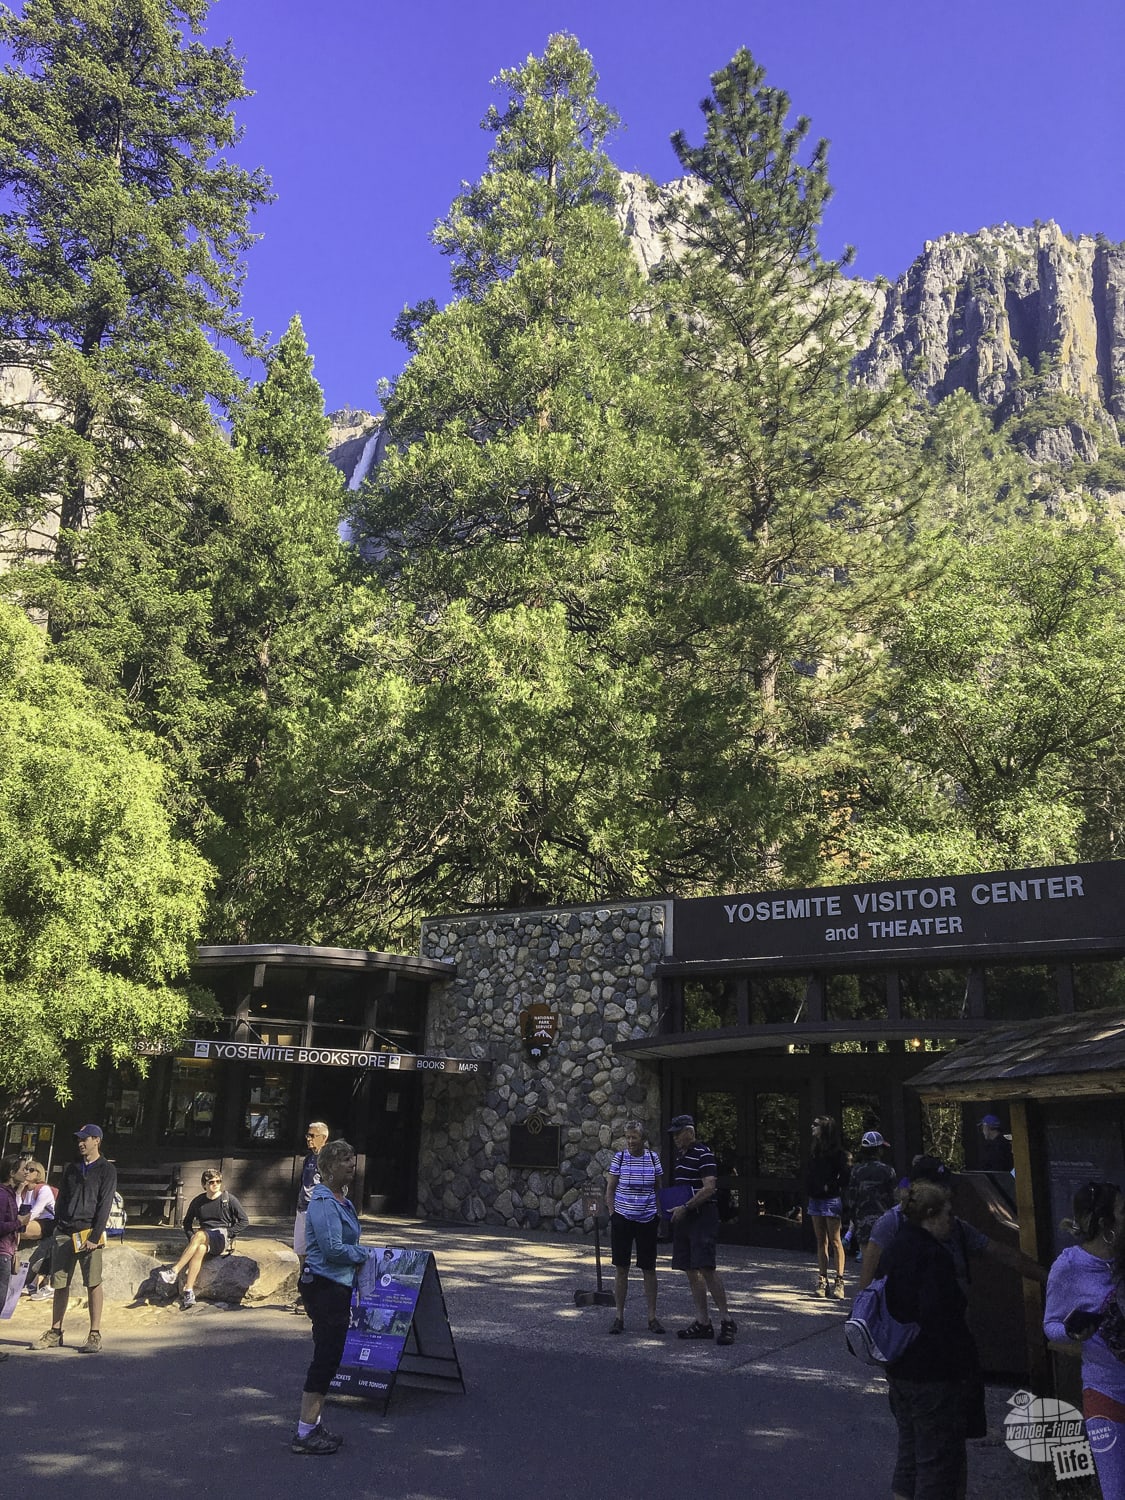 We stopped at the Yosemite Valley Visitor Center before starting the Yosemite Valley Loop Trail